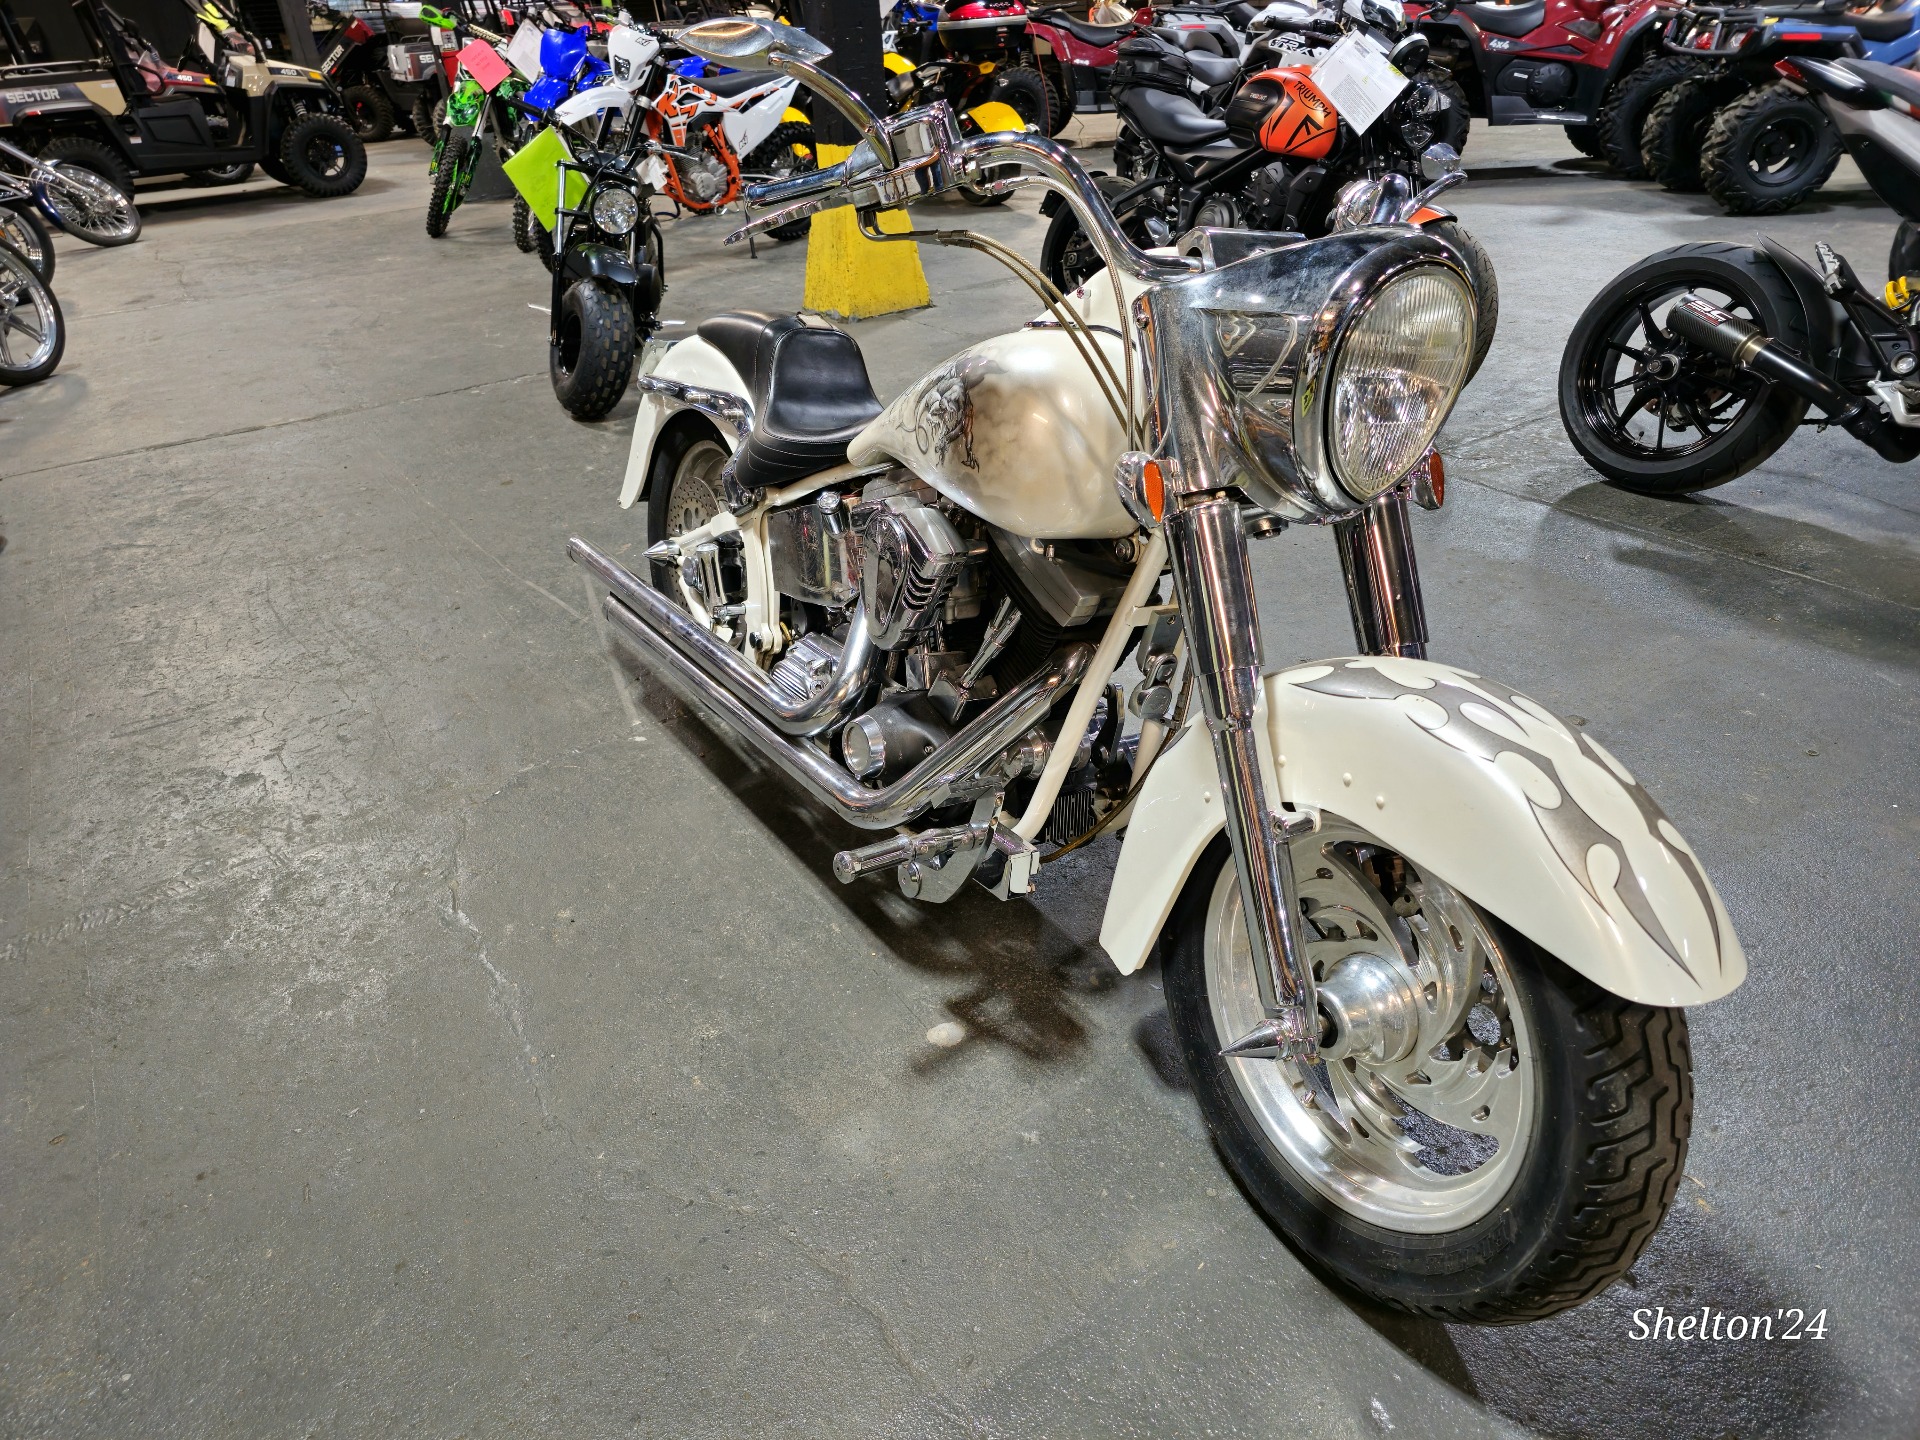 2003 ULTRA DIAMOND PRO SOFTAIL in Kingsport, Tennessee - Photo 4